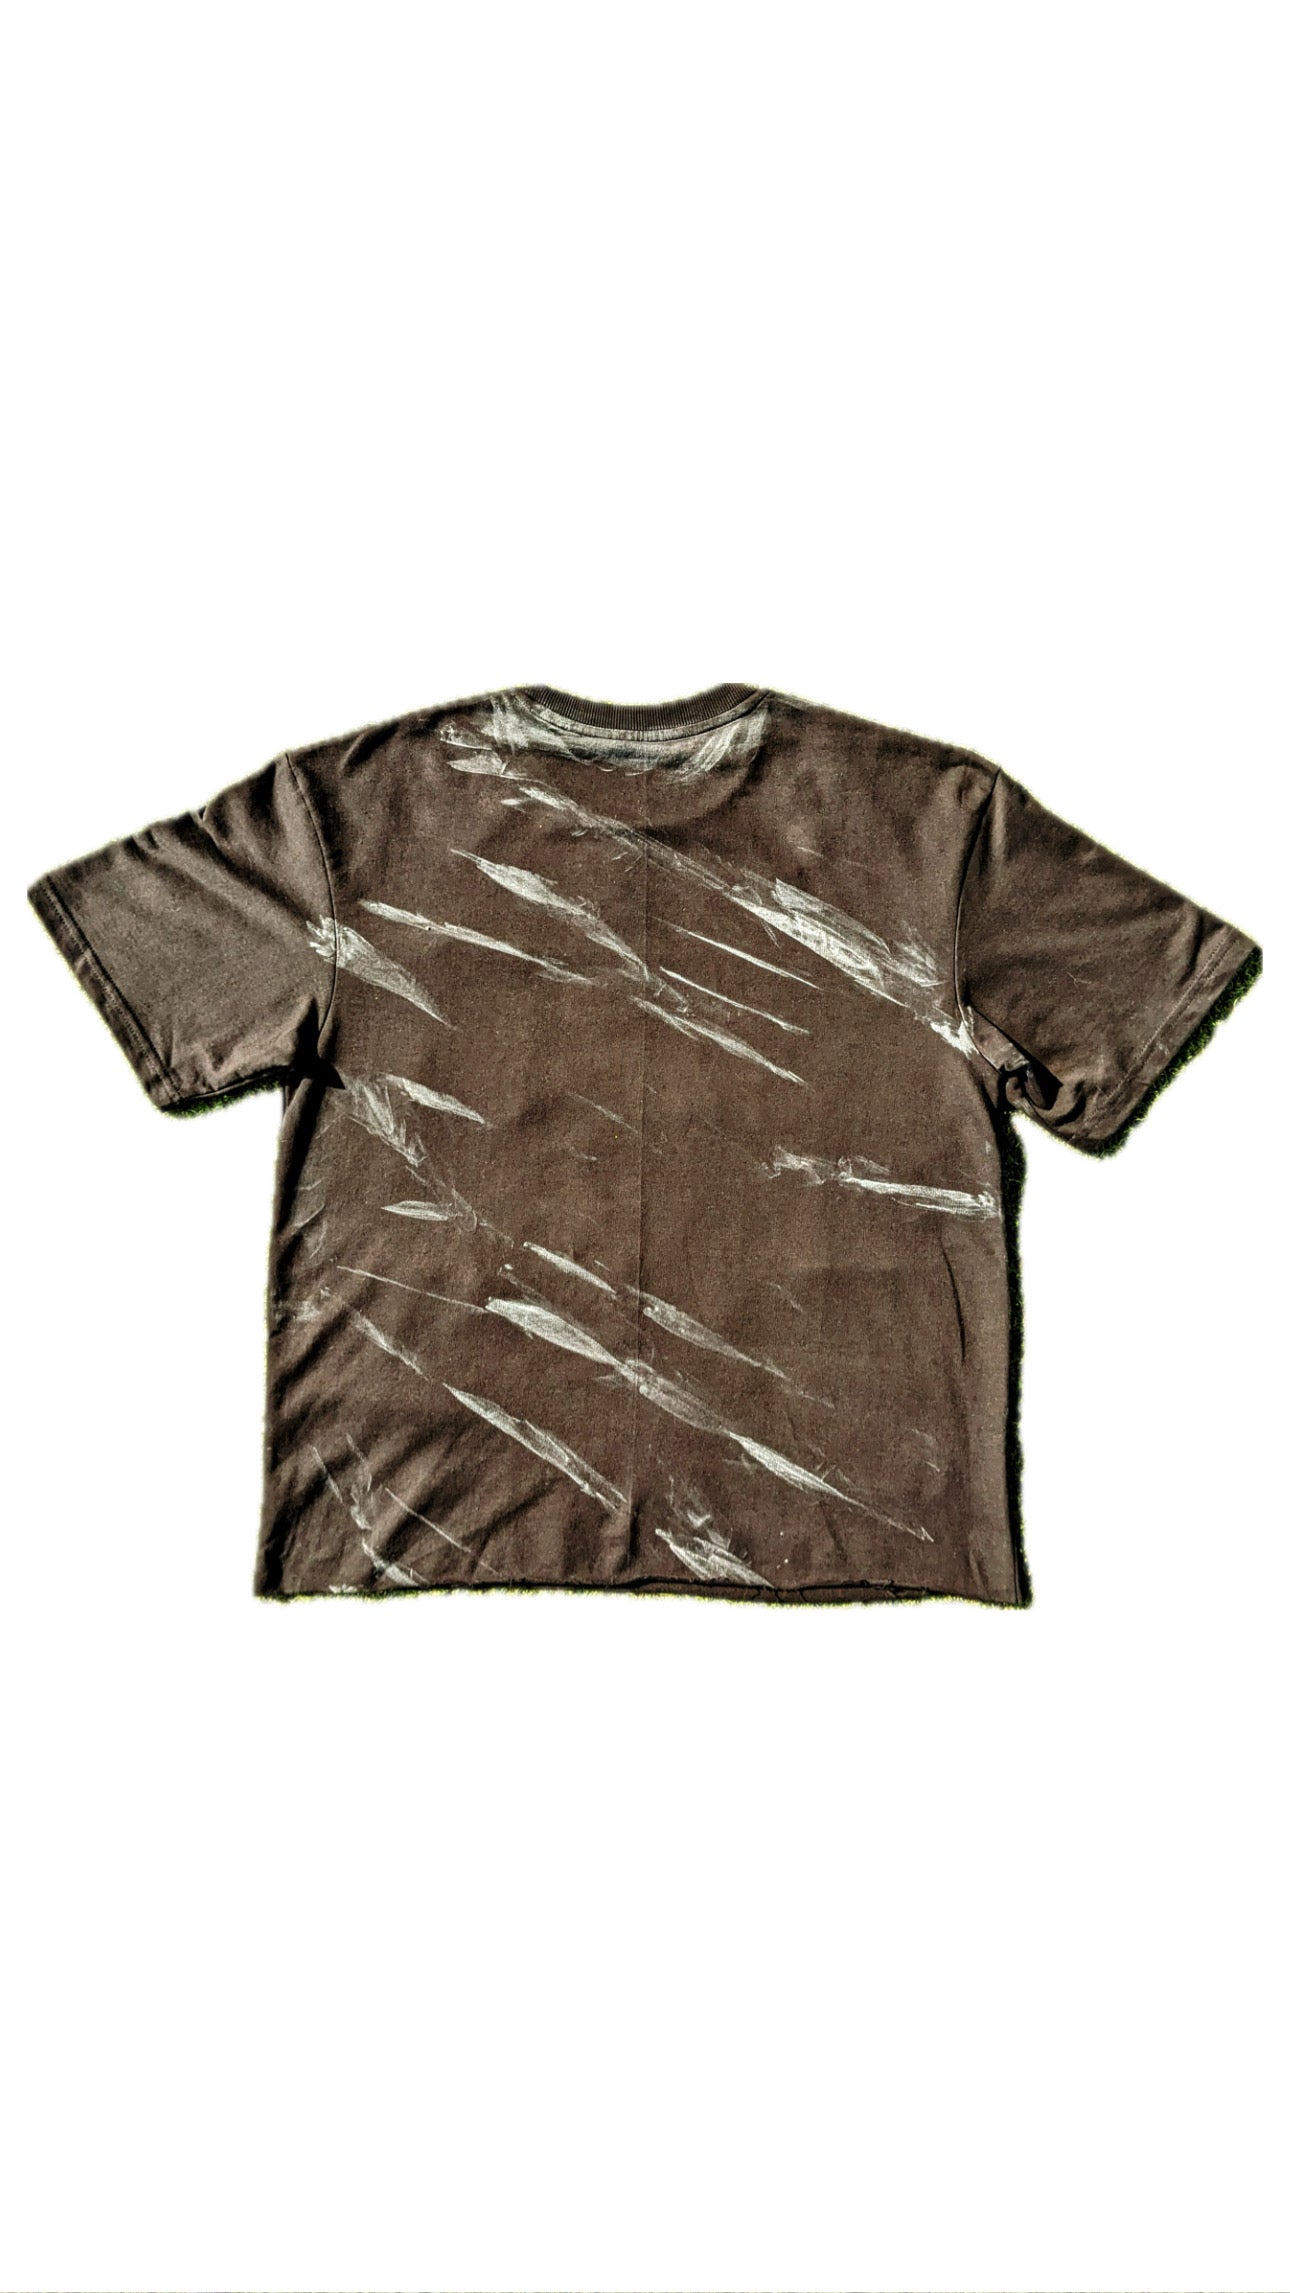 DOG washed patched tee